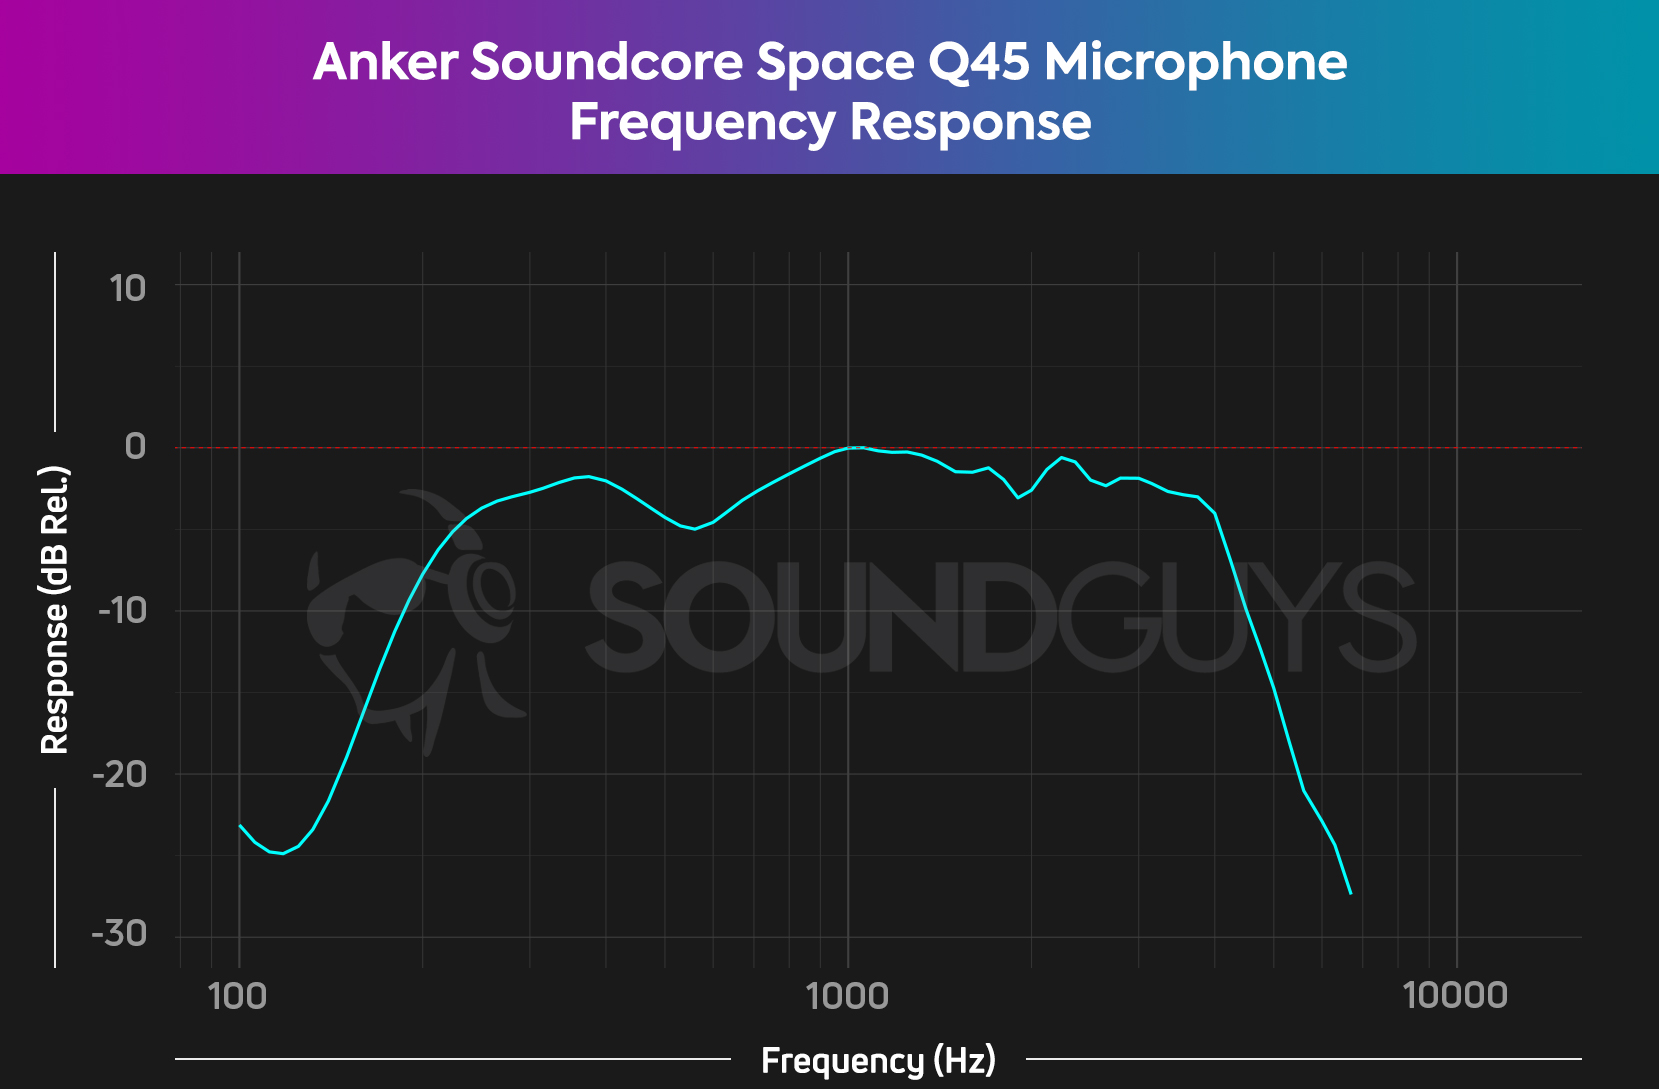 A chart depicts the microphone frequency response of the Anker Soundcore Space Q45, which rolls off the extreme low and high ends.